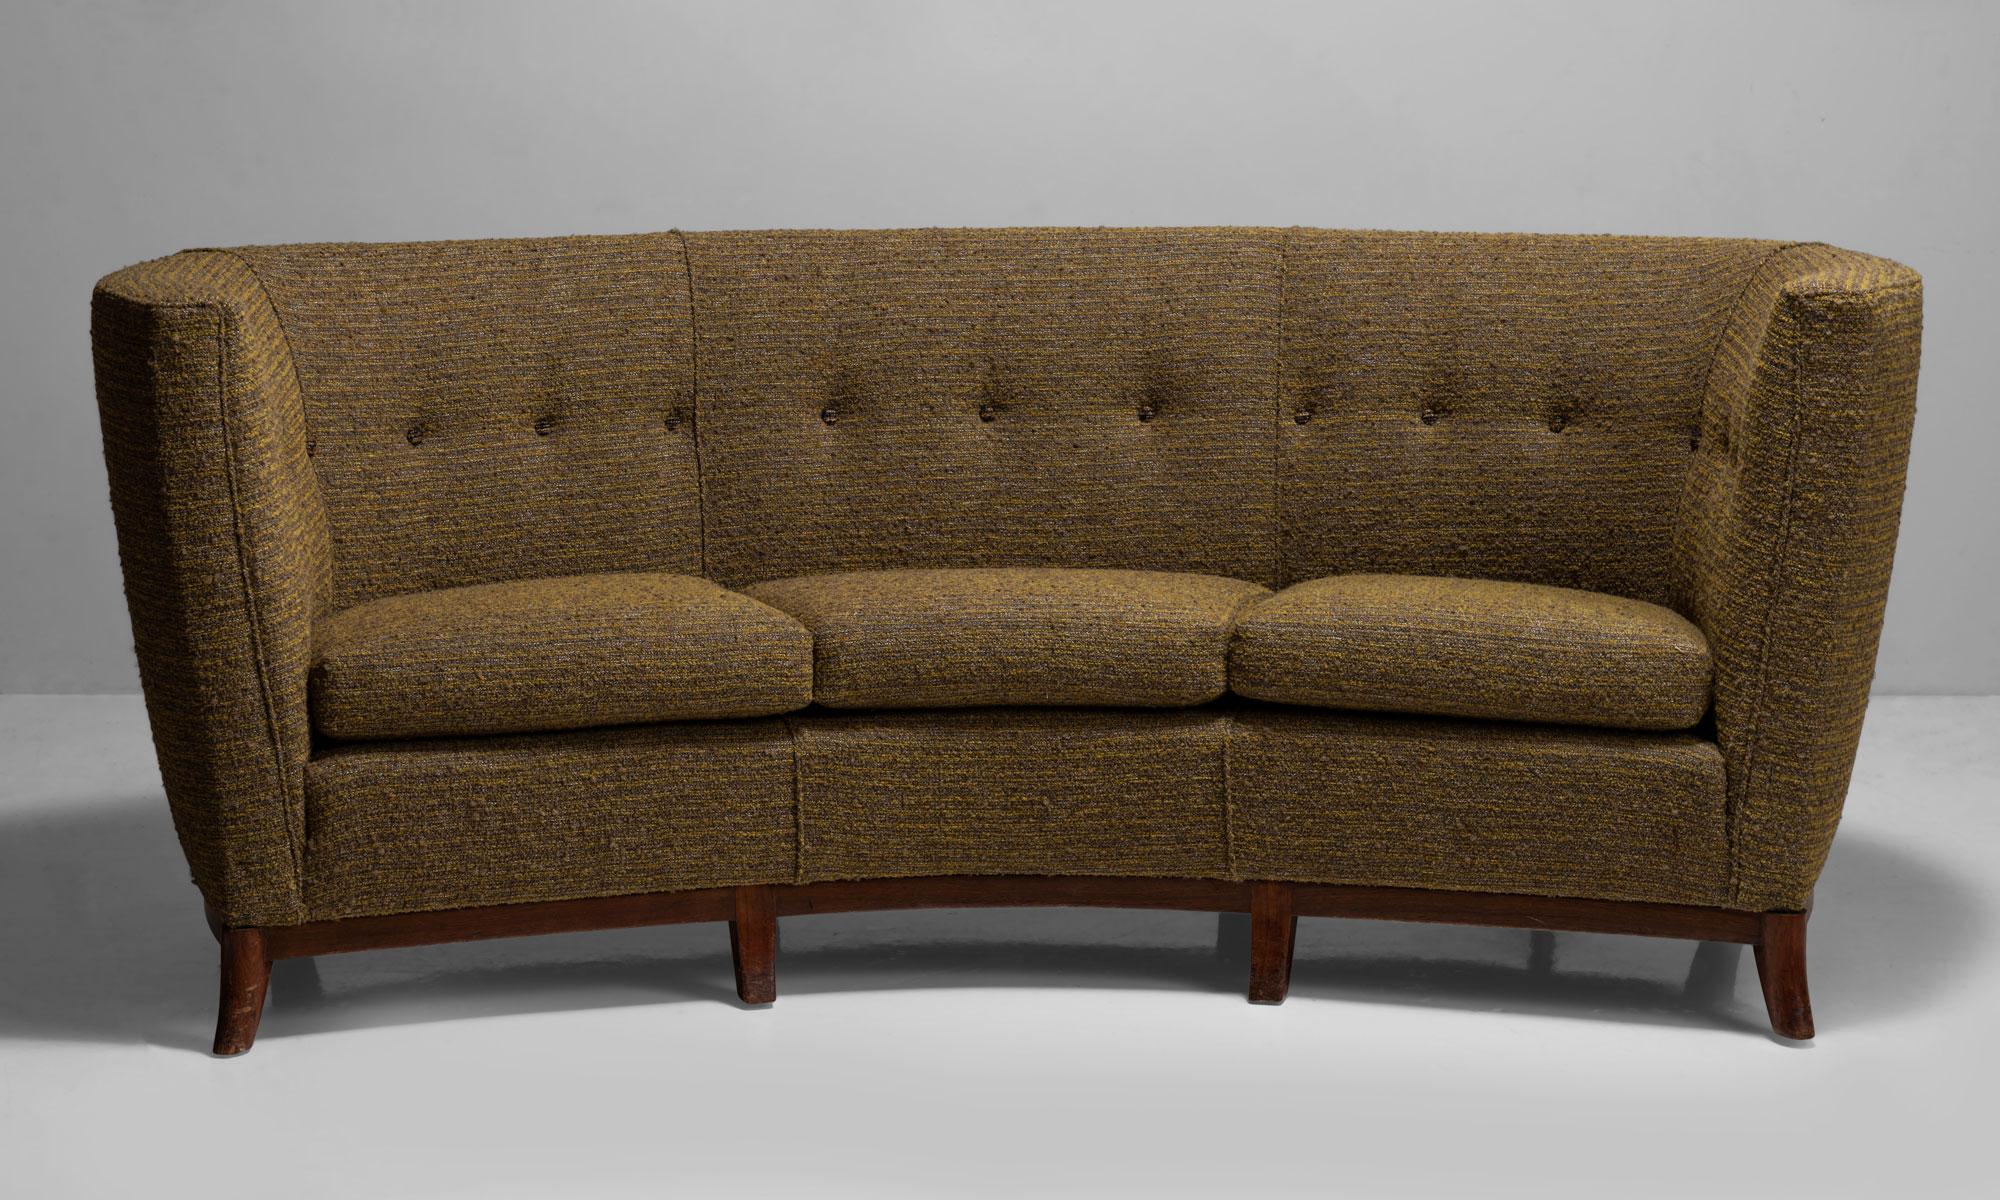 Curved Sofa in Wool Blend from Pierre Frey

Designed by Trevor Page Norwich. Curved sofa with walnut legs. Newly reupholstered.

England, circa 1950.